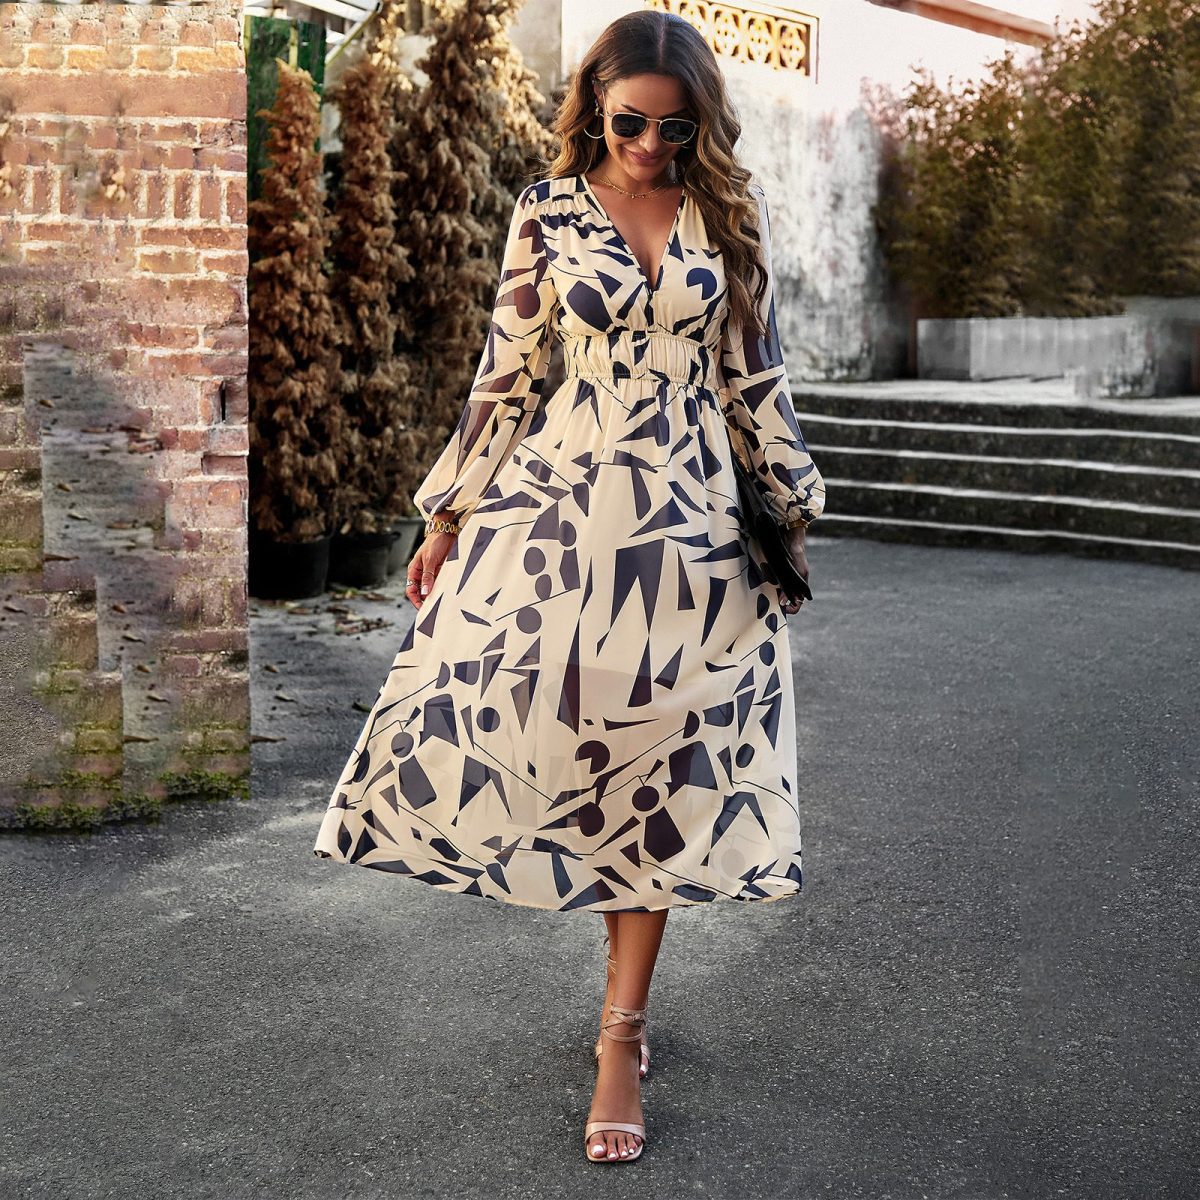 Bohemian Vacation Casual Printed Dress in Dresses